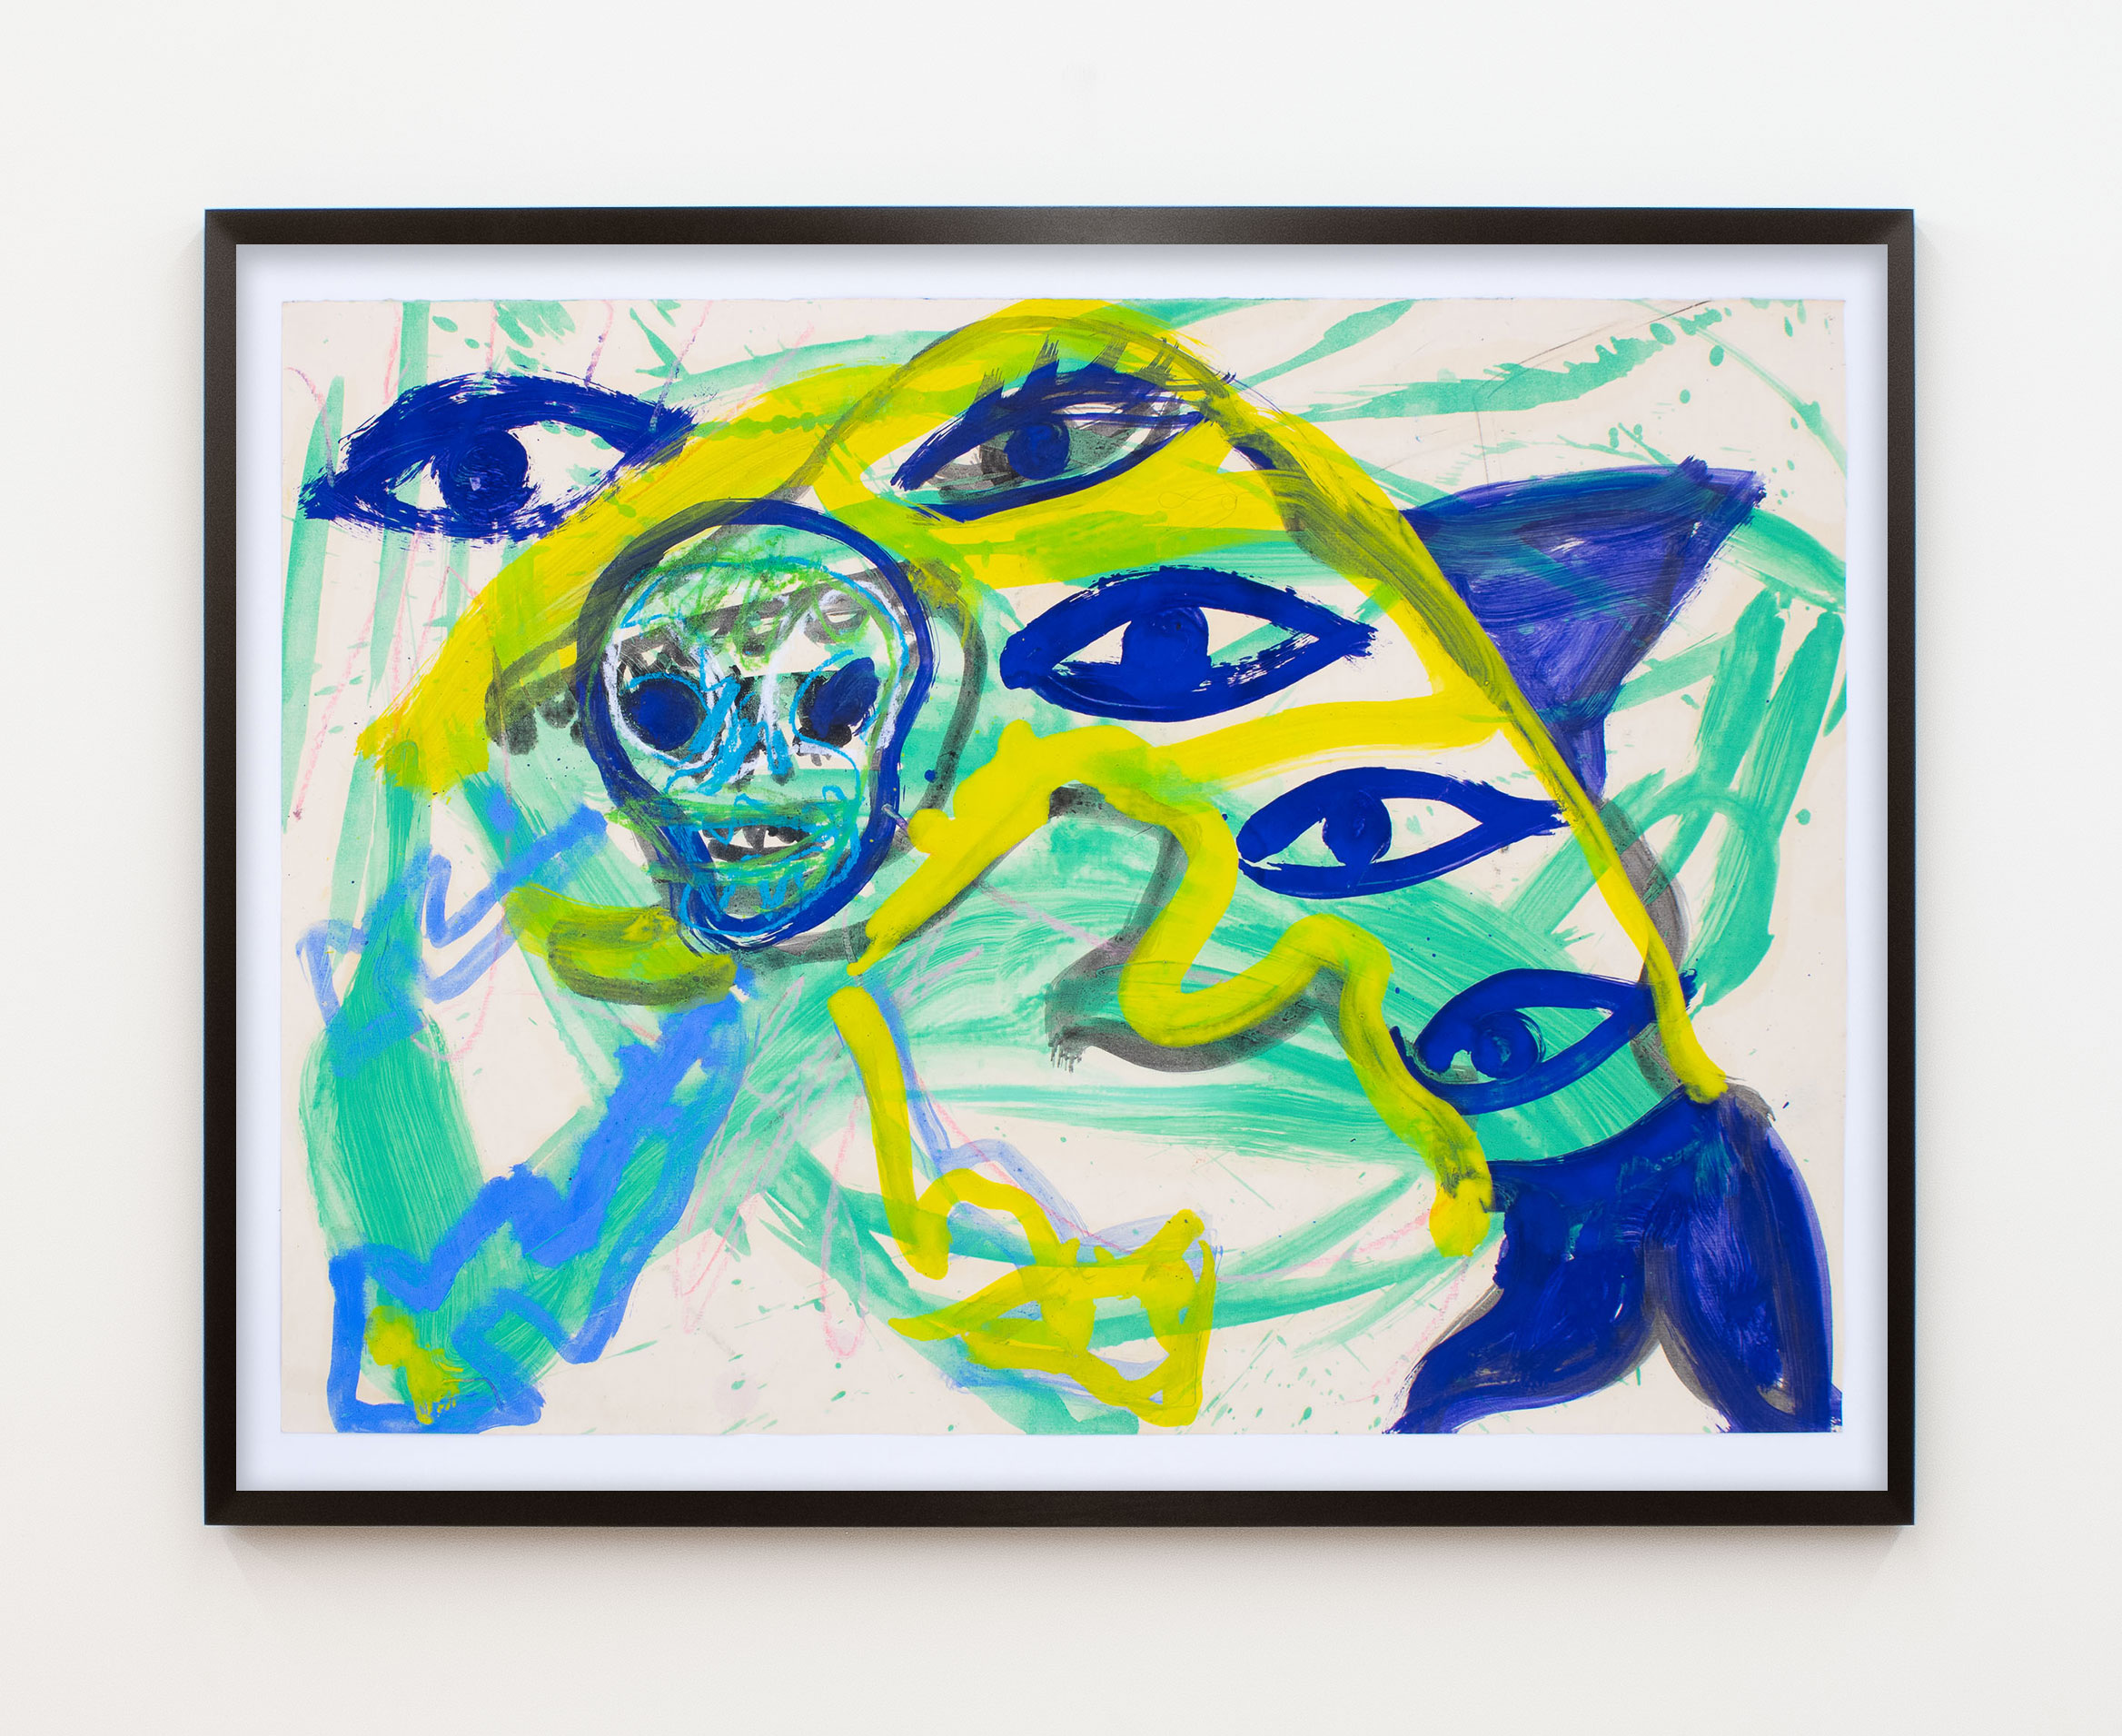 Bill Saylor, Untitled, 2023, Acrylic and crayon on paper, 19 5/8 x 27 1/2 in.